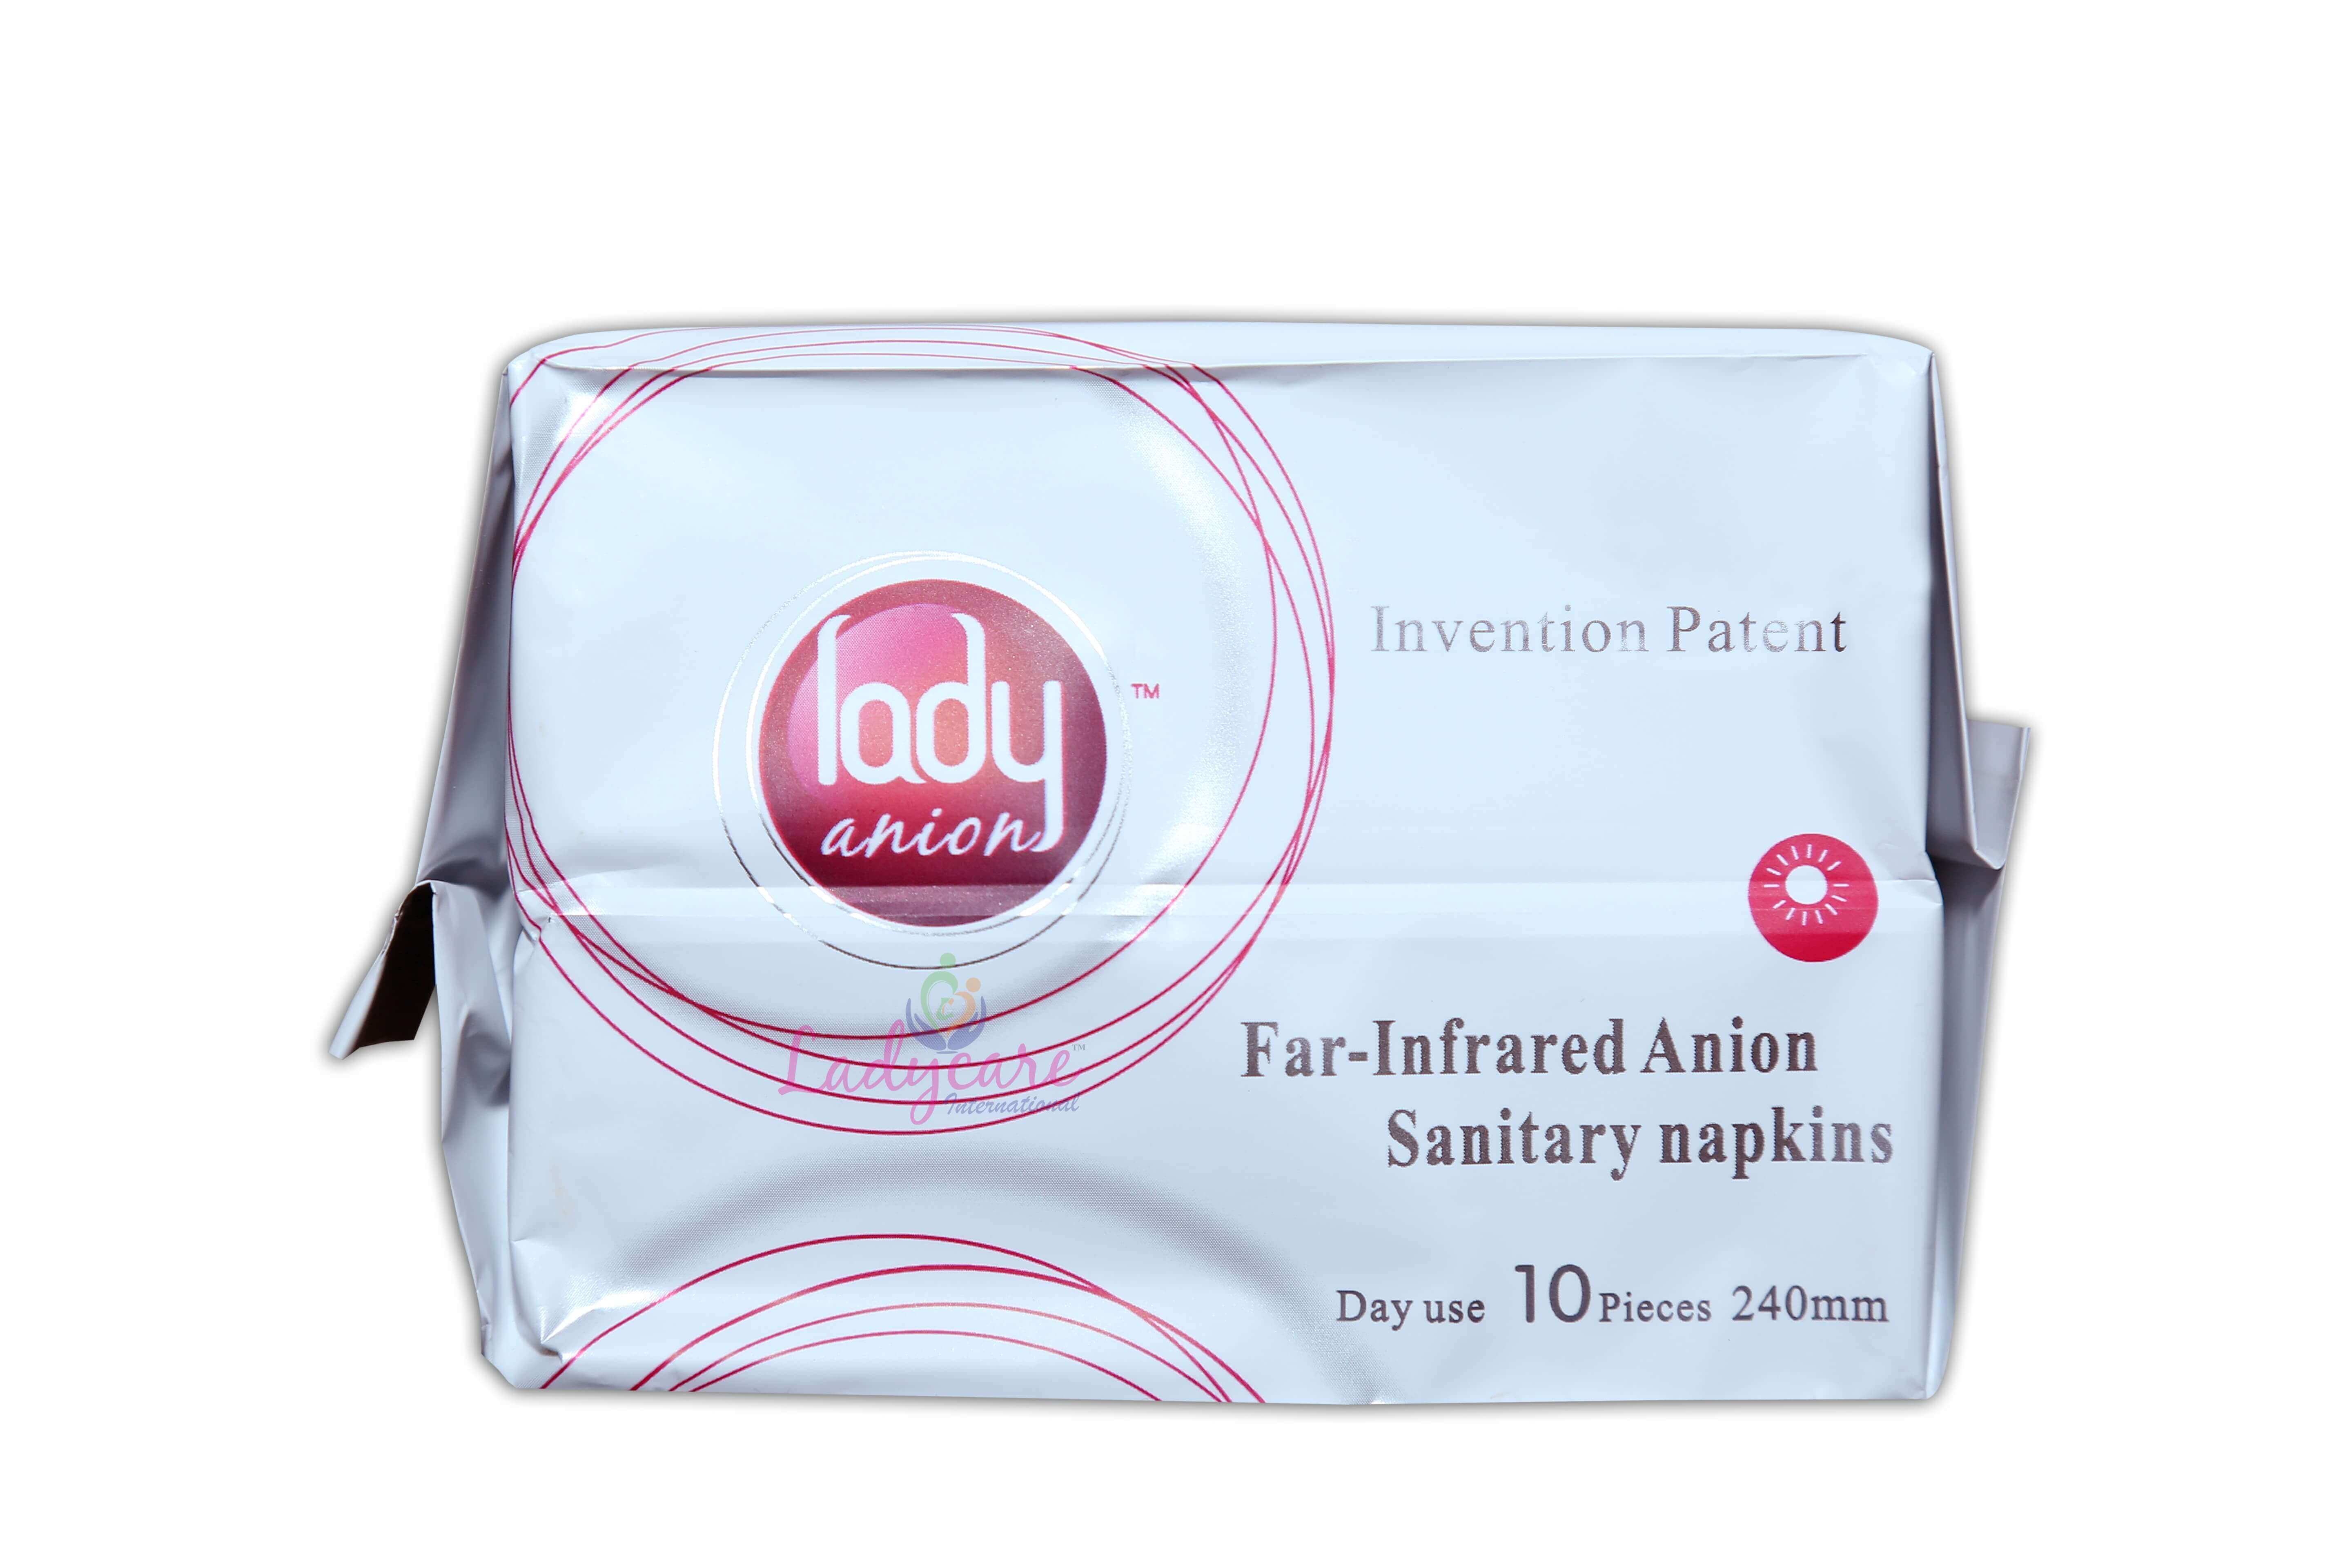 Lady anion sanitary napkins - day use  - 240mm - 10 pieces/pack